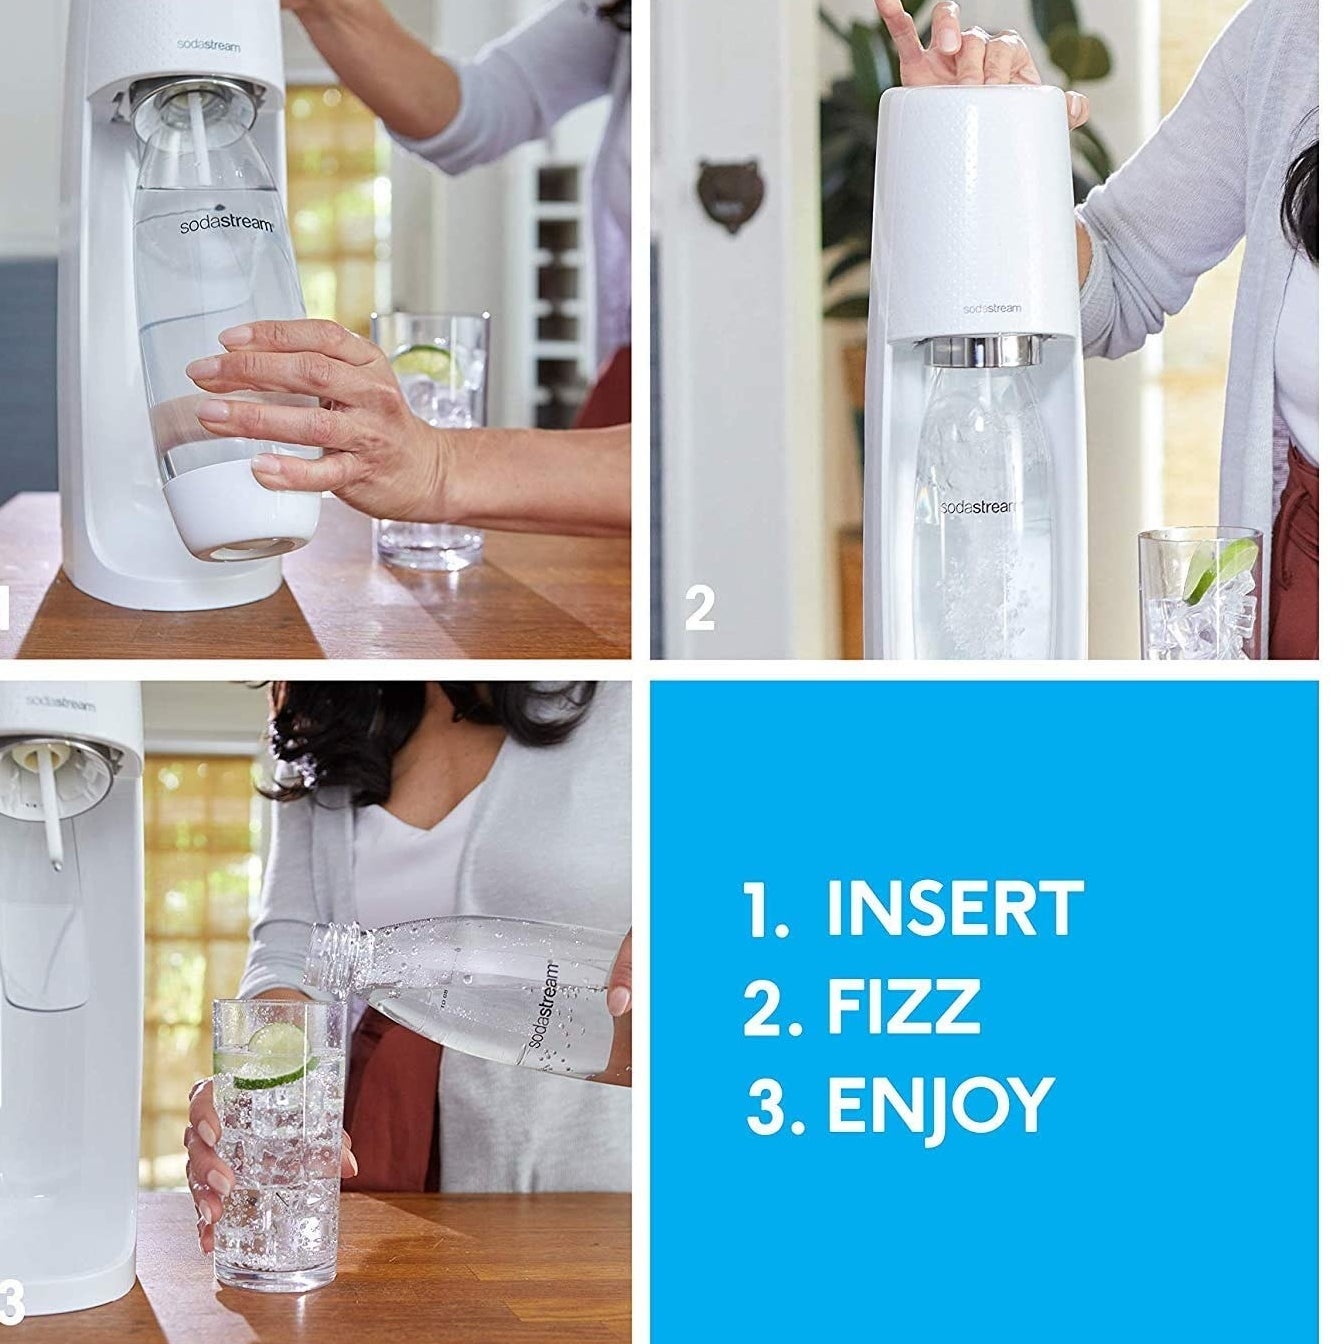 The Soda Stream being used to make seltzer 